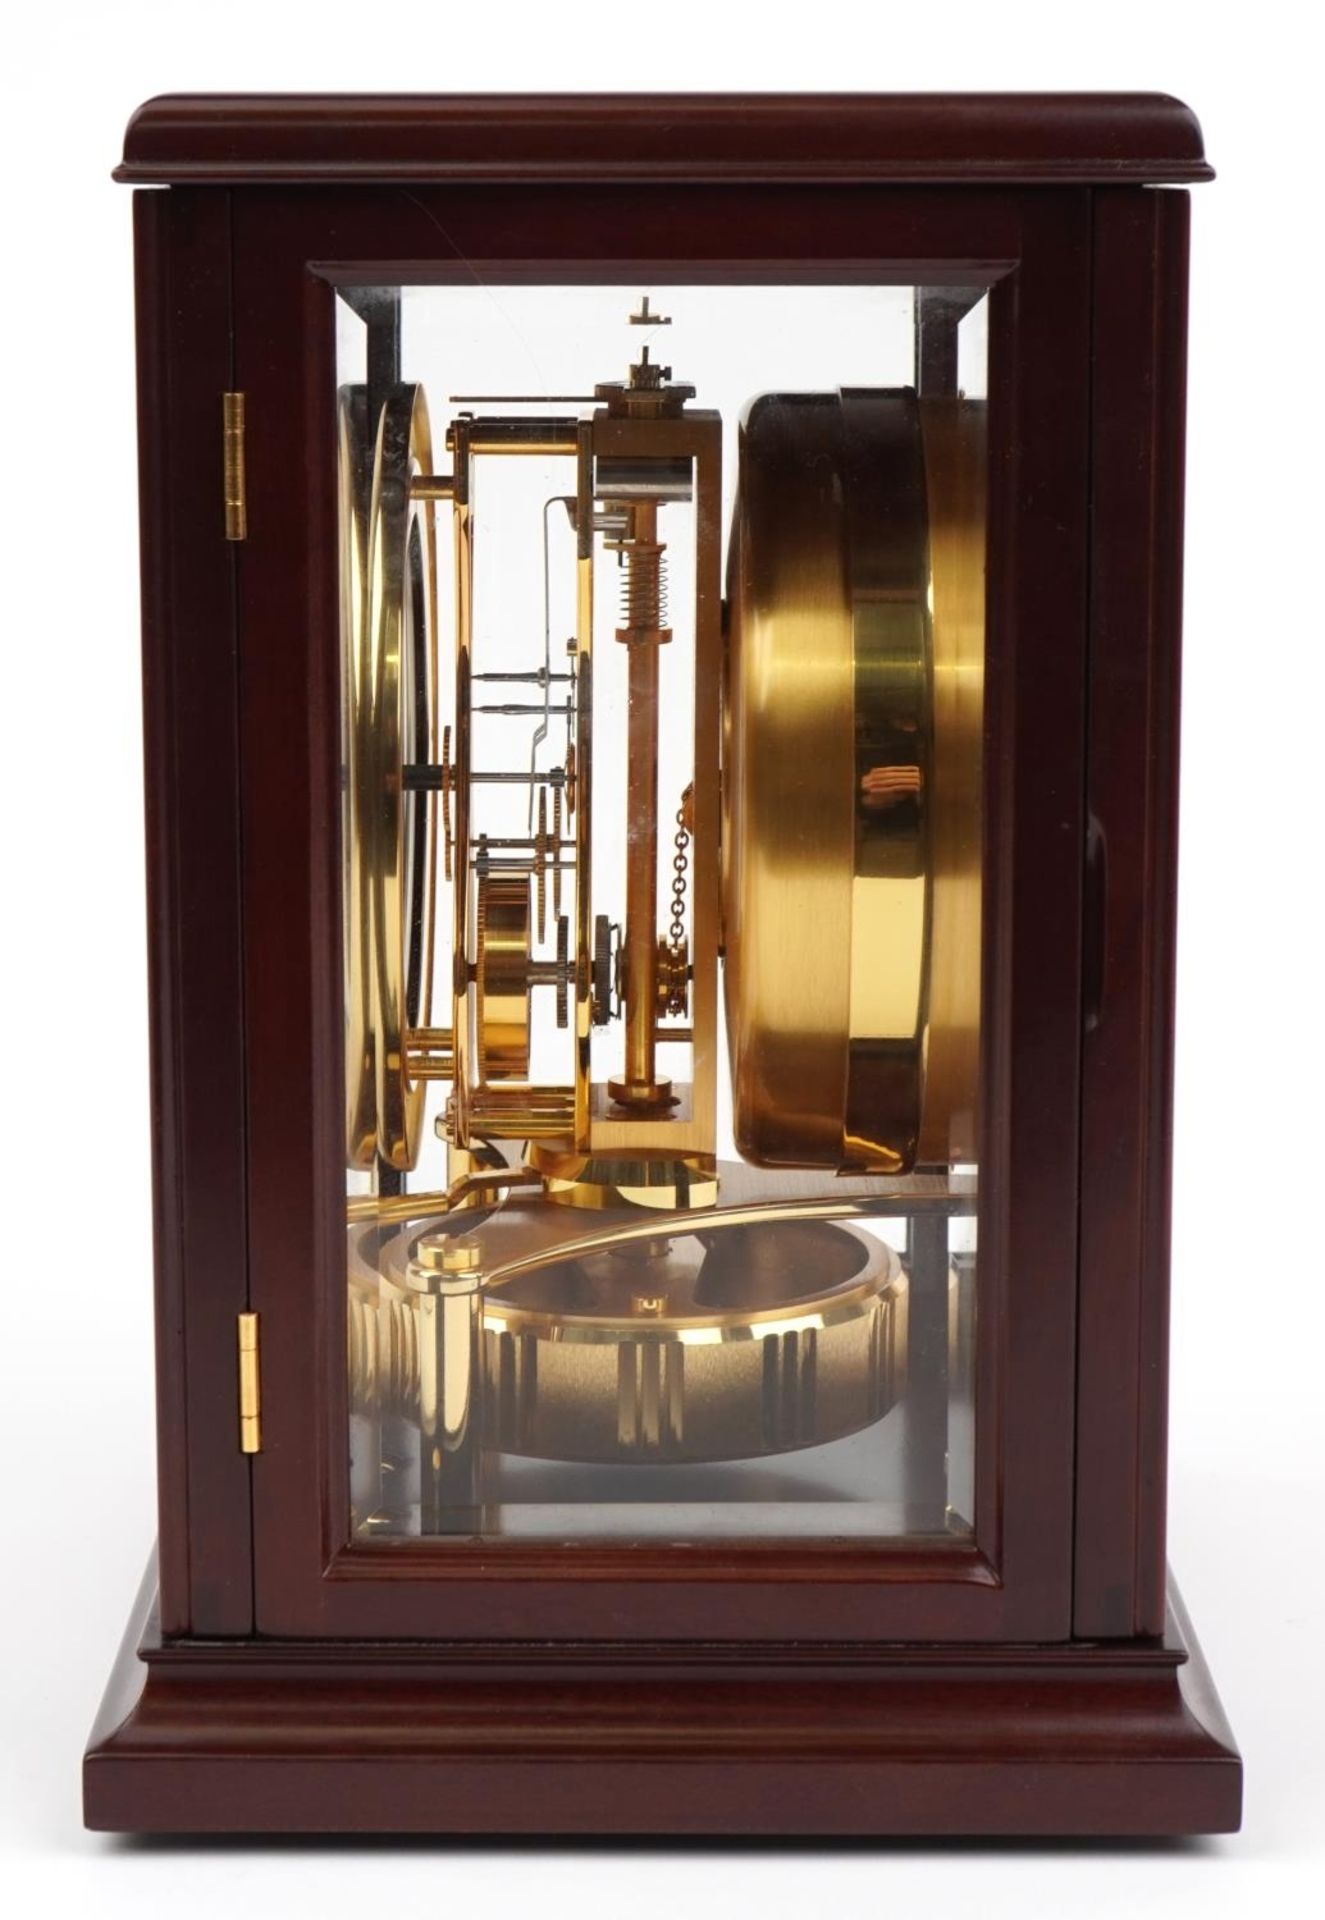 Jaeger LeCoultre, Atmos clock housed in a glazed mahogany case with bevelled glass with Asprey's box - Image 5 of 7